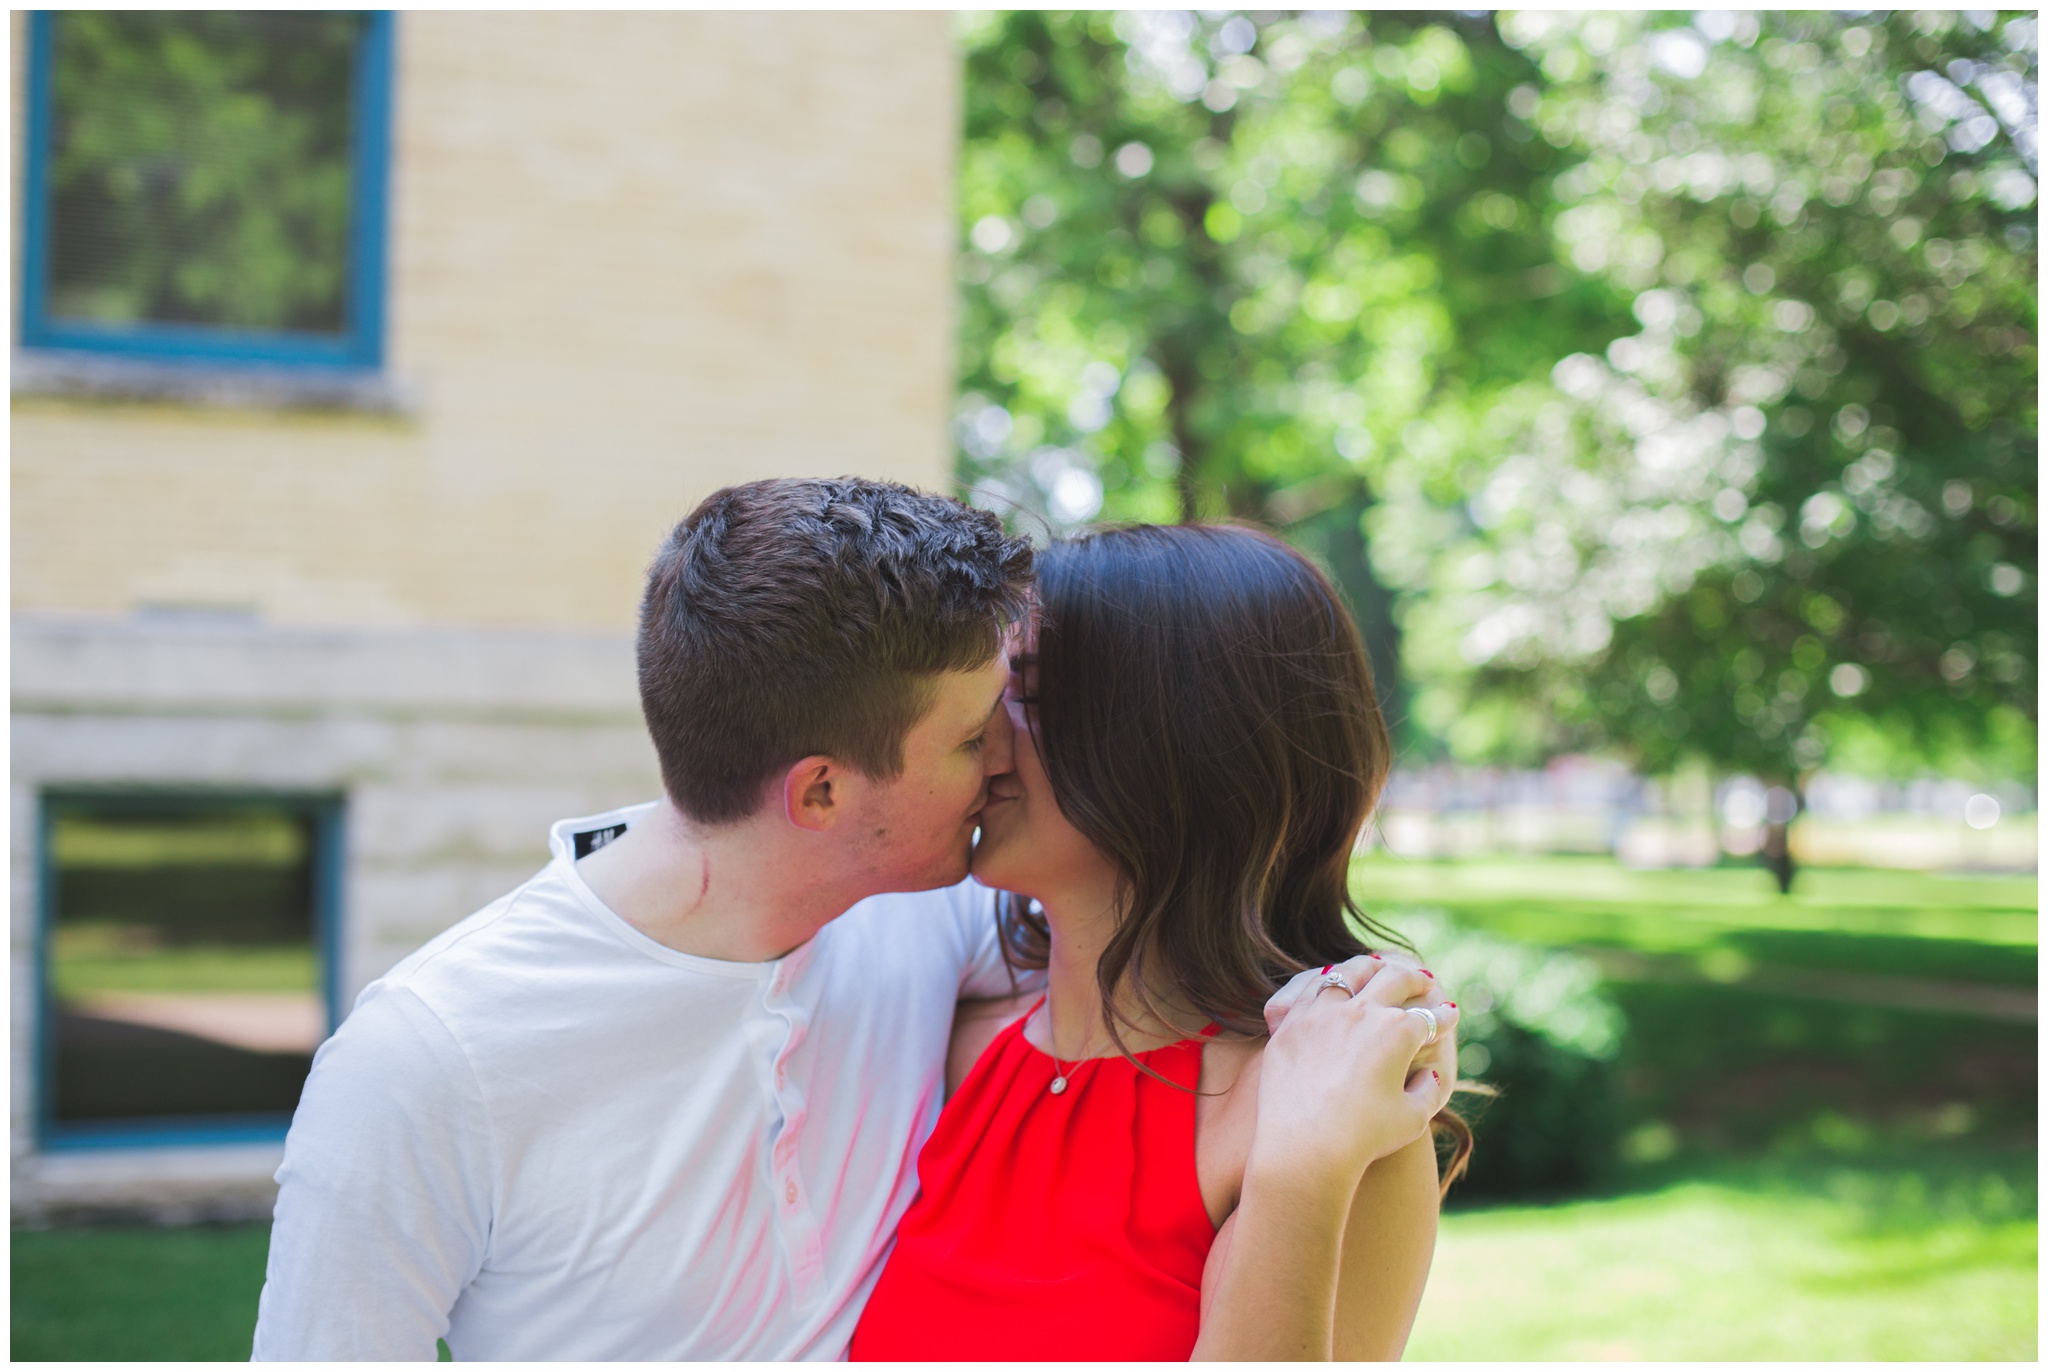 engagement session at Ball State University in Muncie Indiana